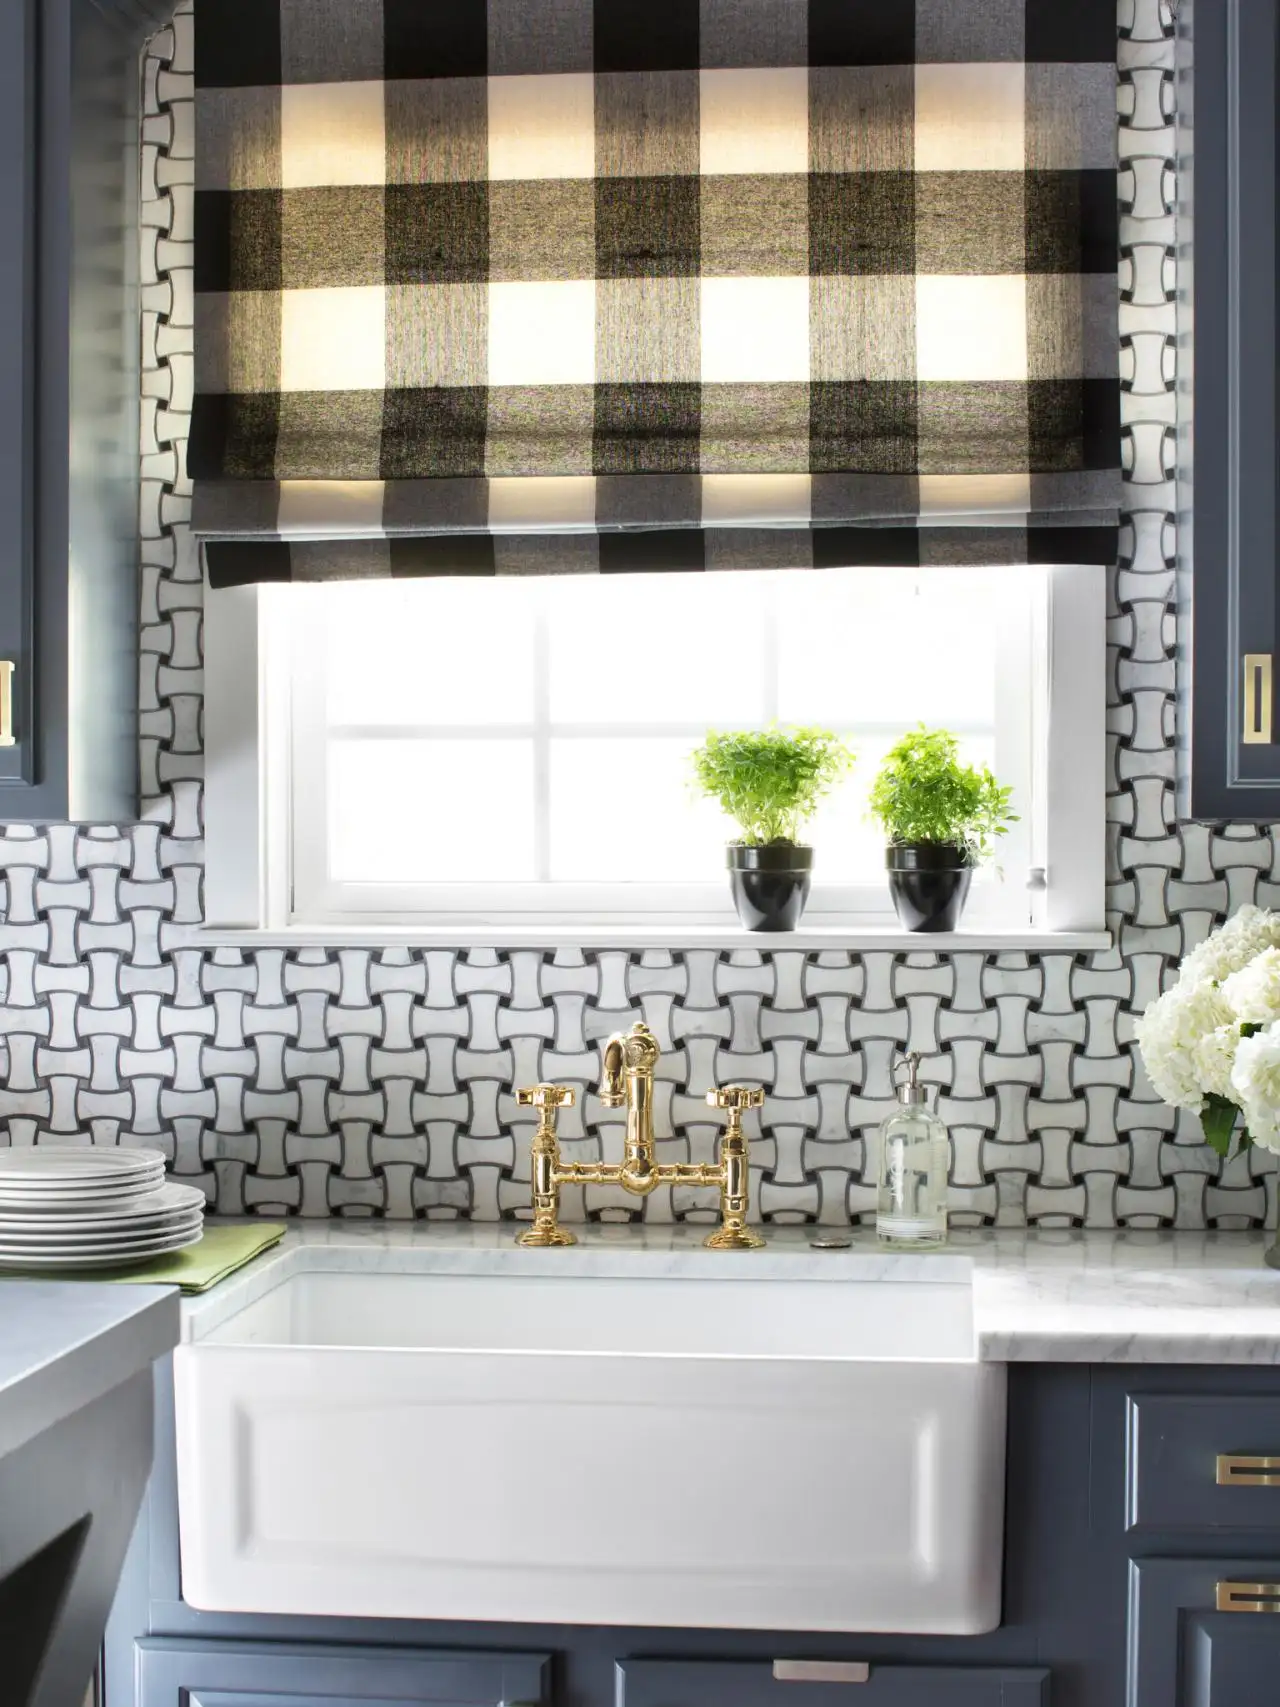 Black and white shades for kitchen